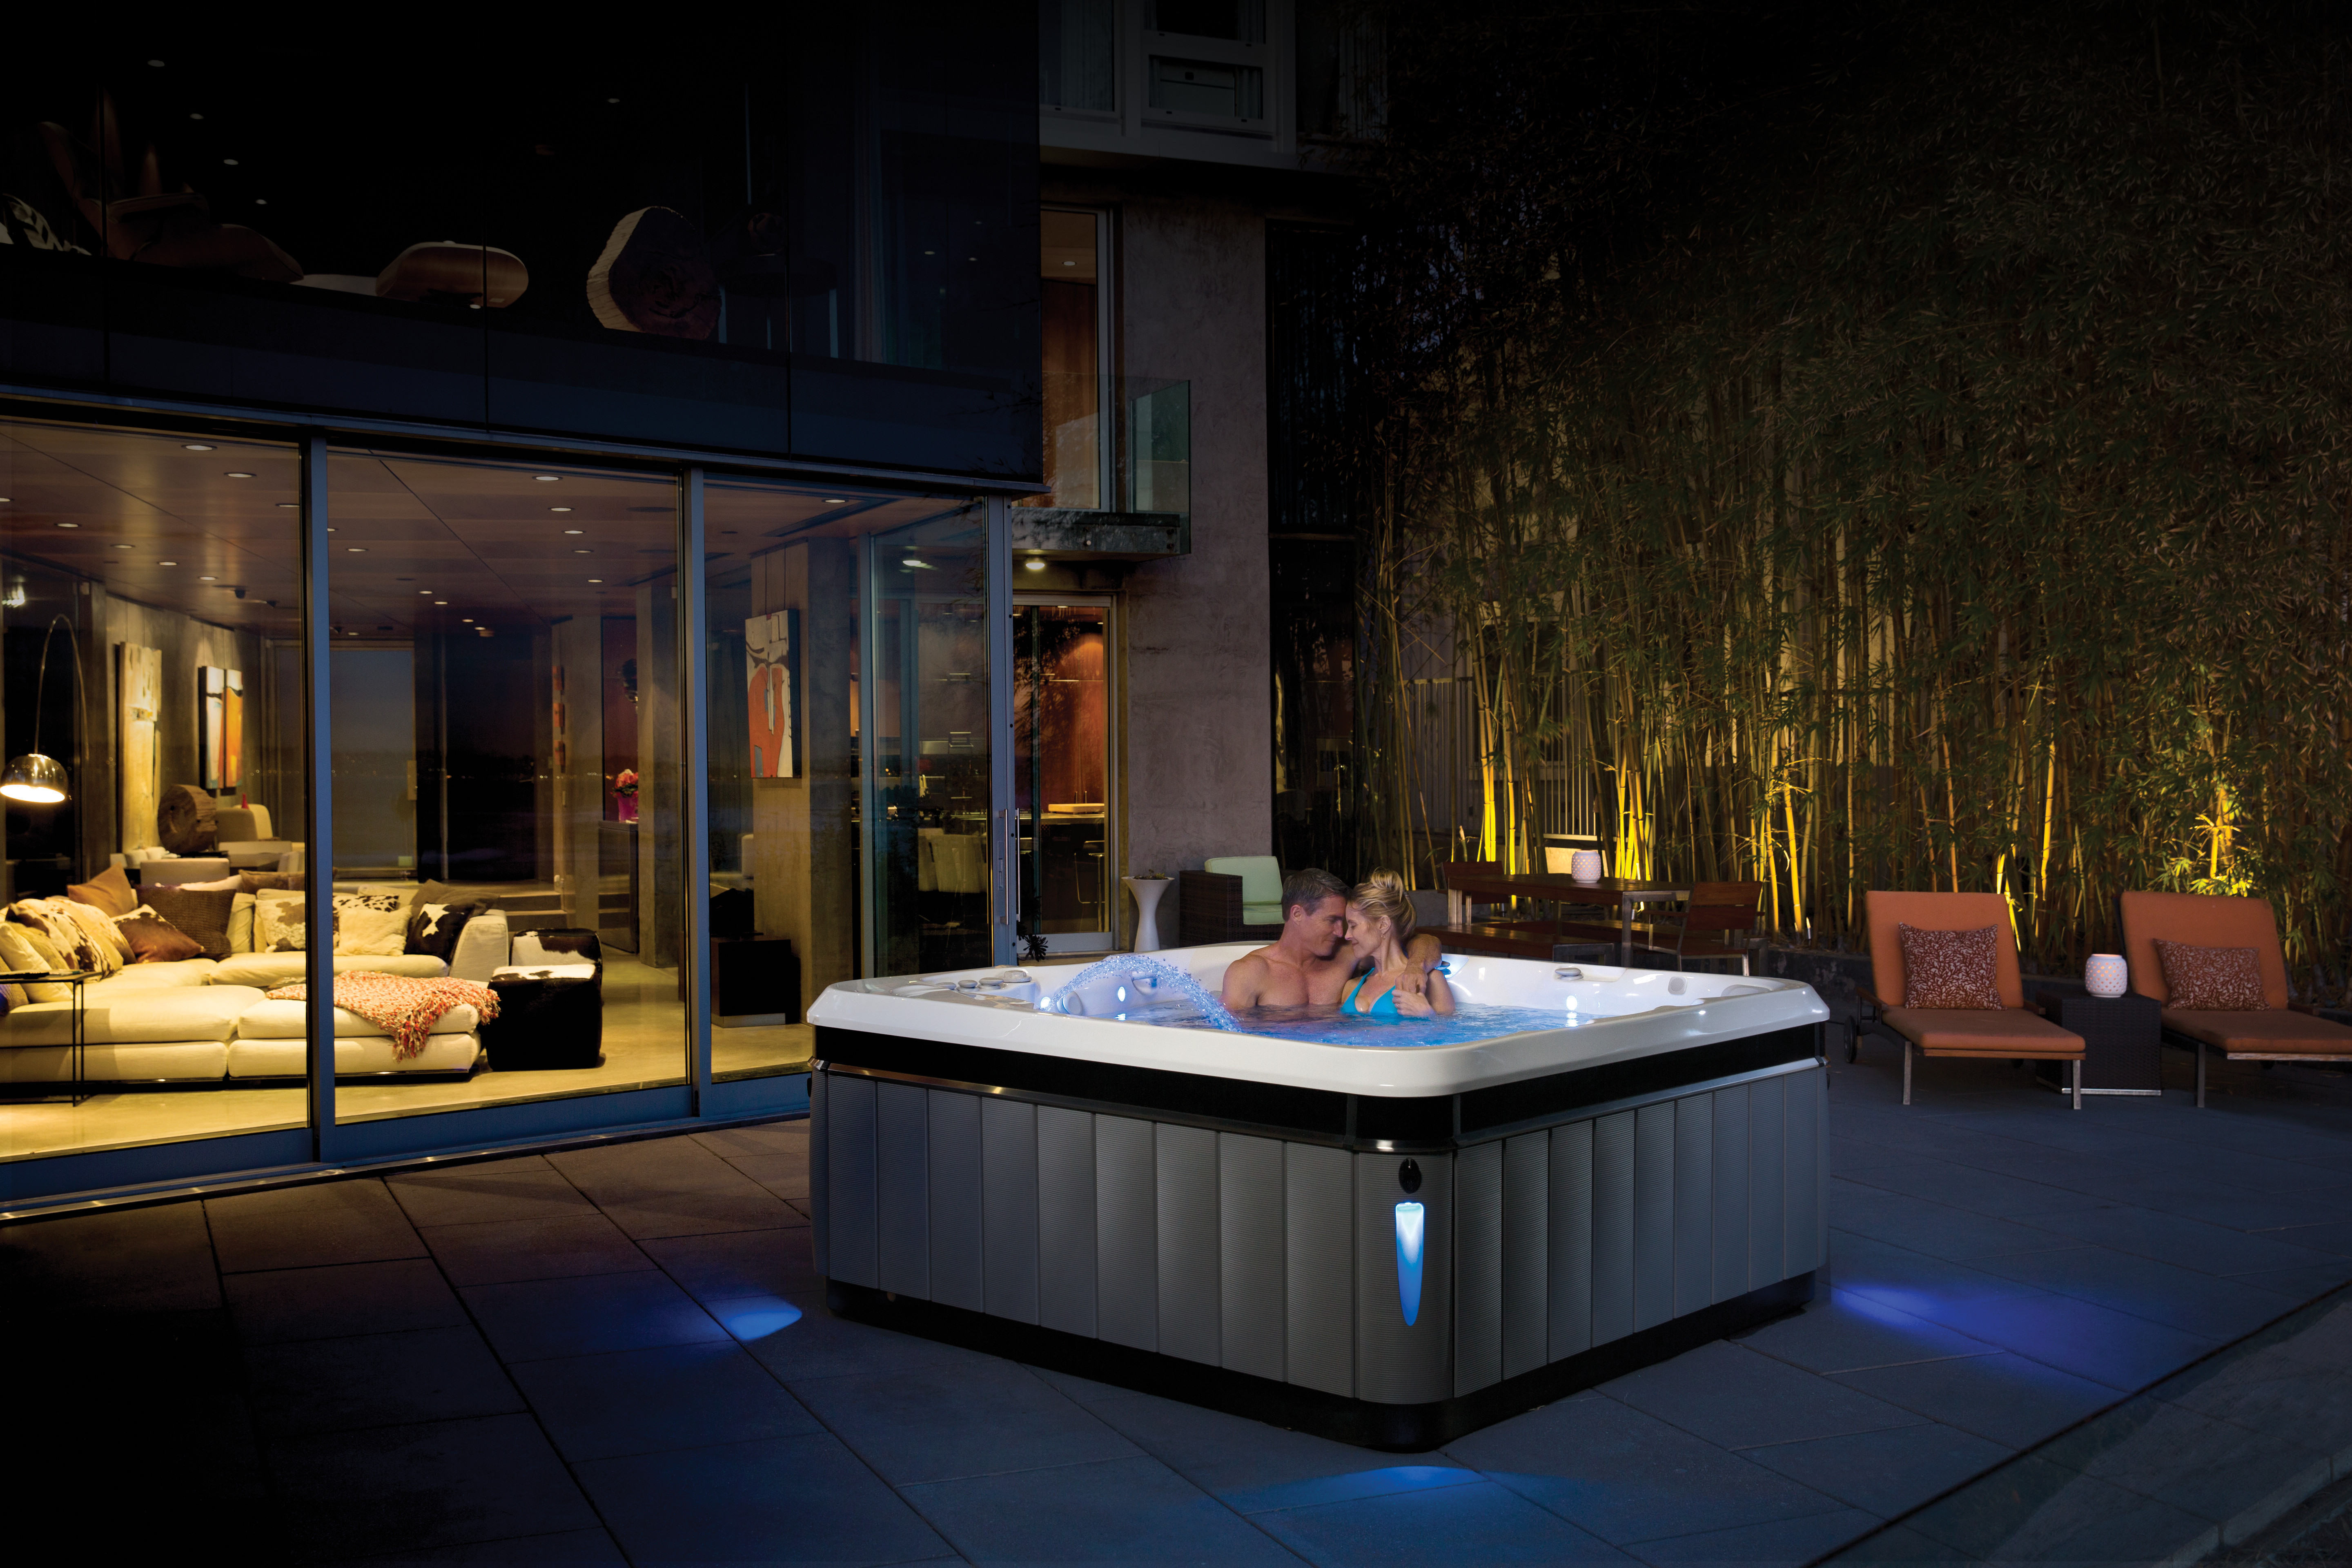 Marquis spas® and Caldera spas® offer distinctly different systems and features.